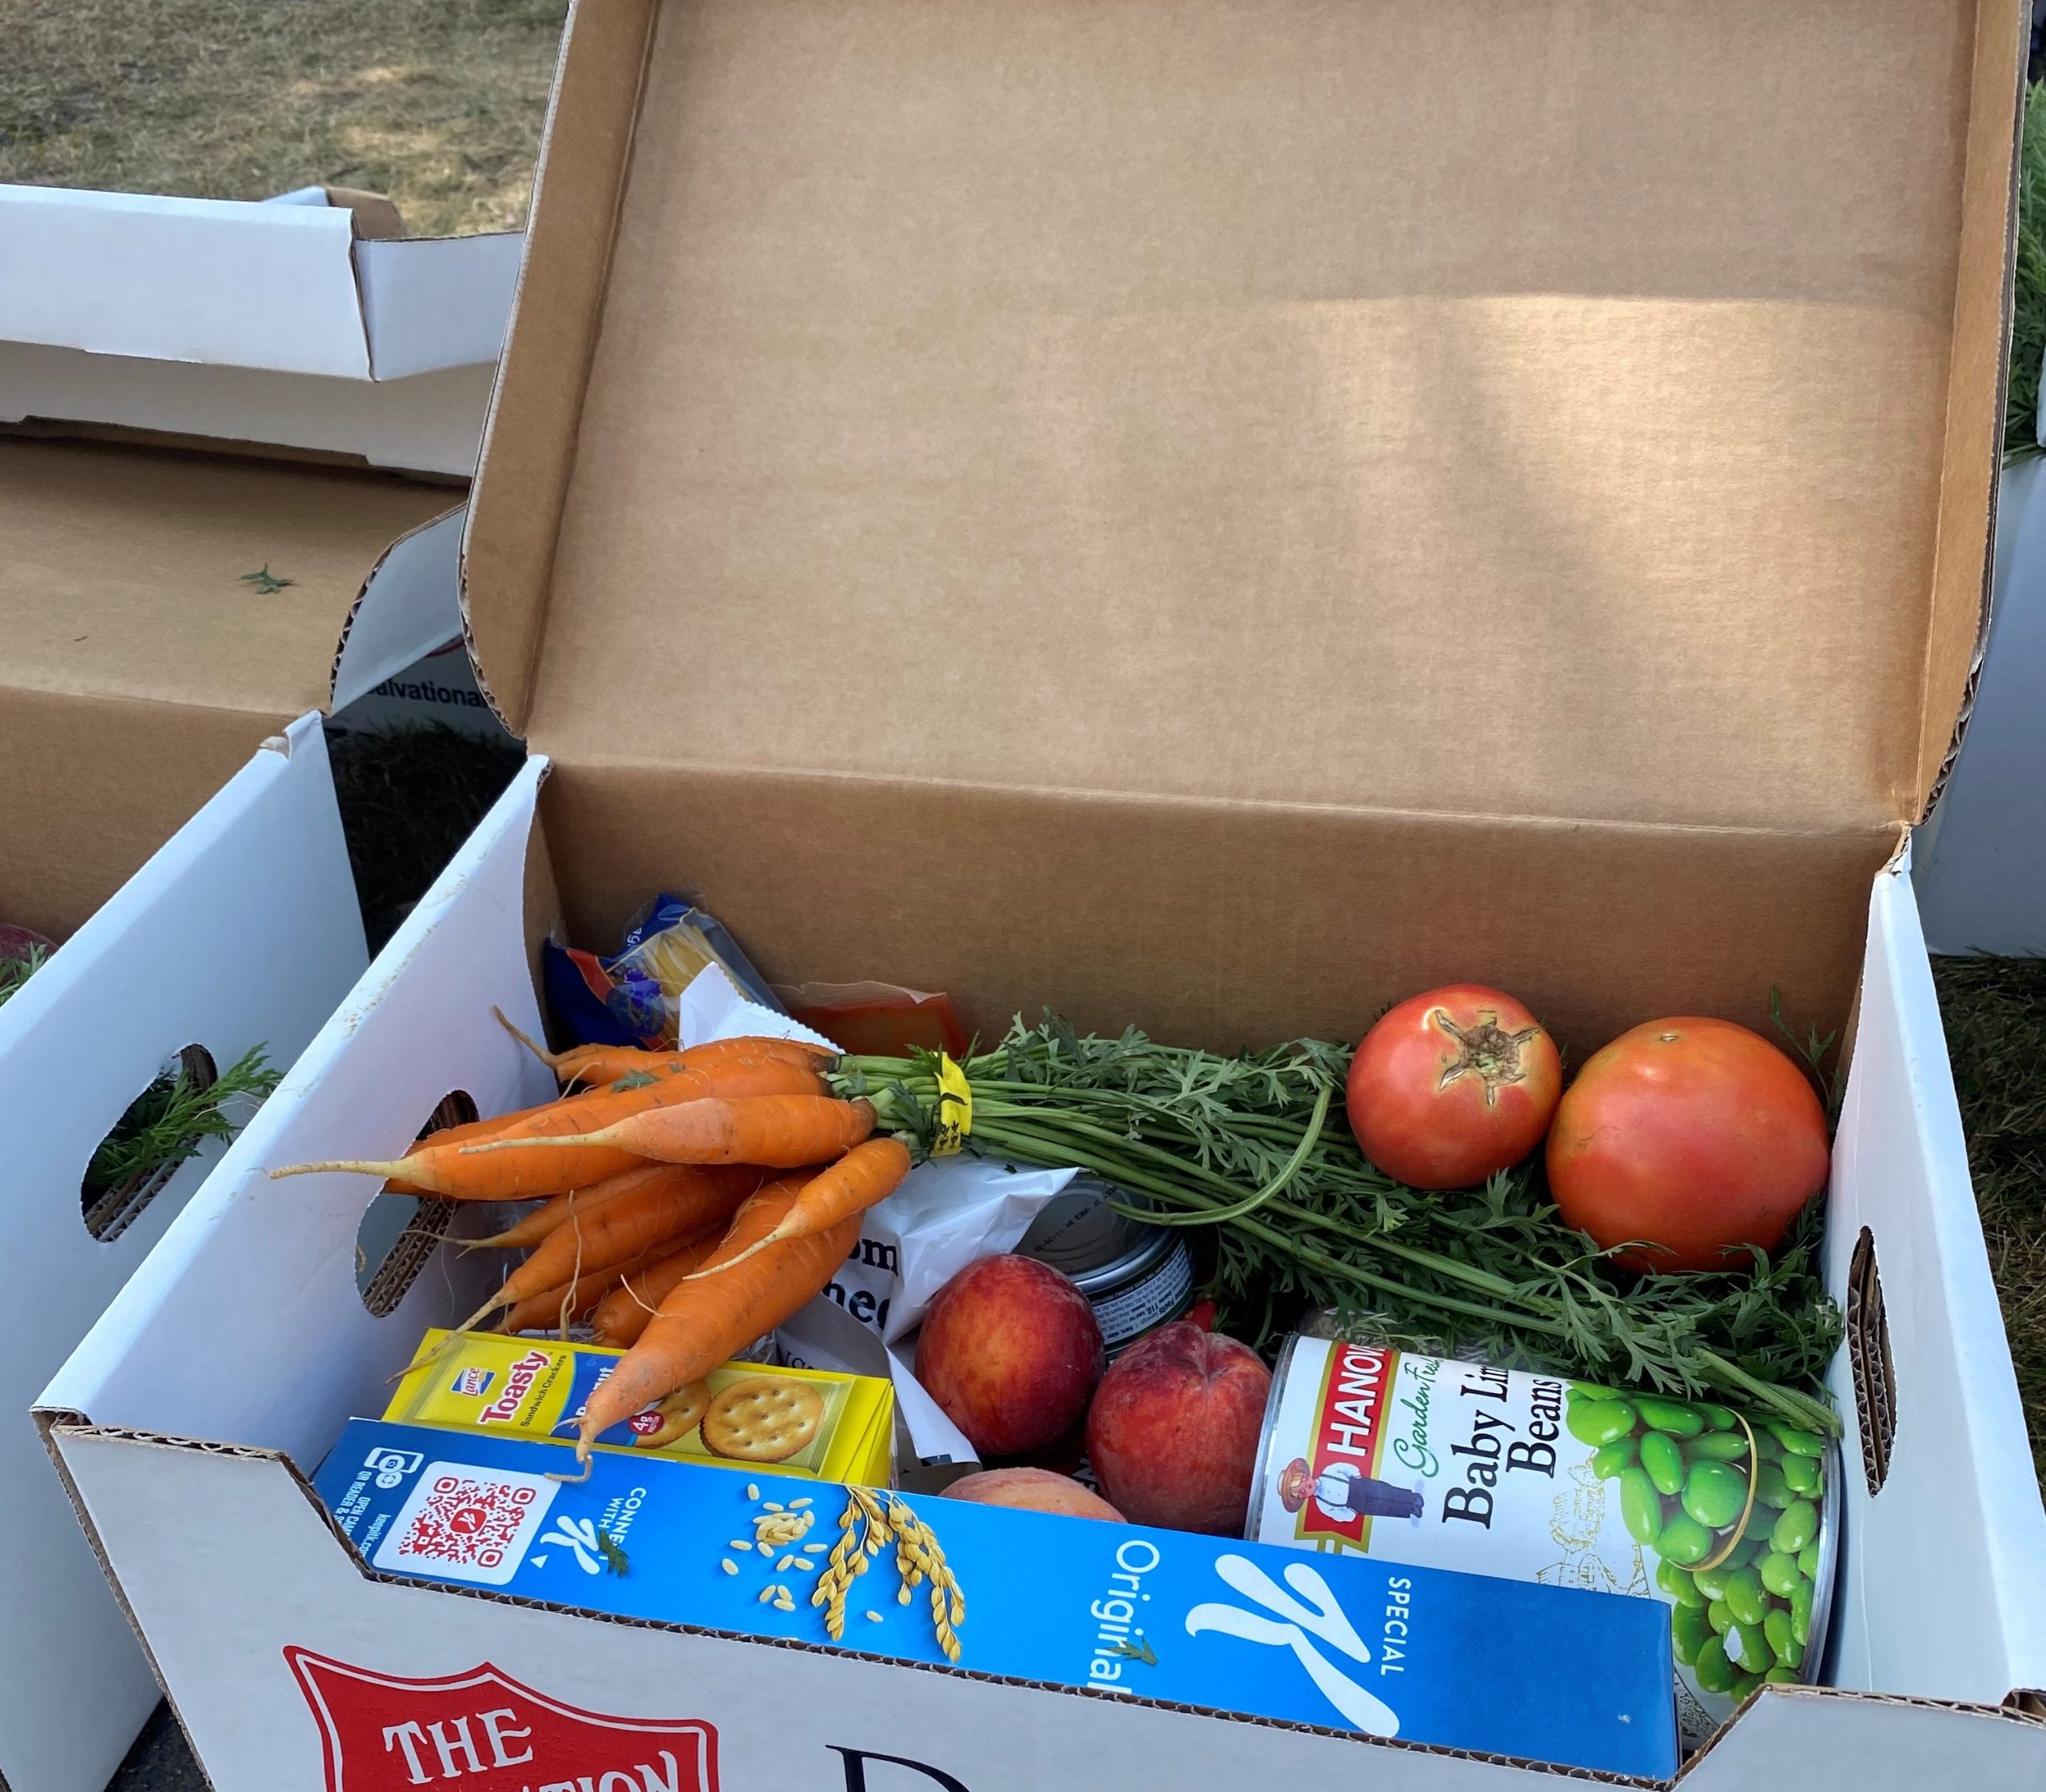 To-go box filled with fresh fruit and vegetables